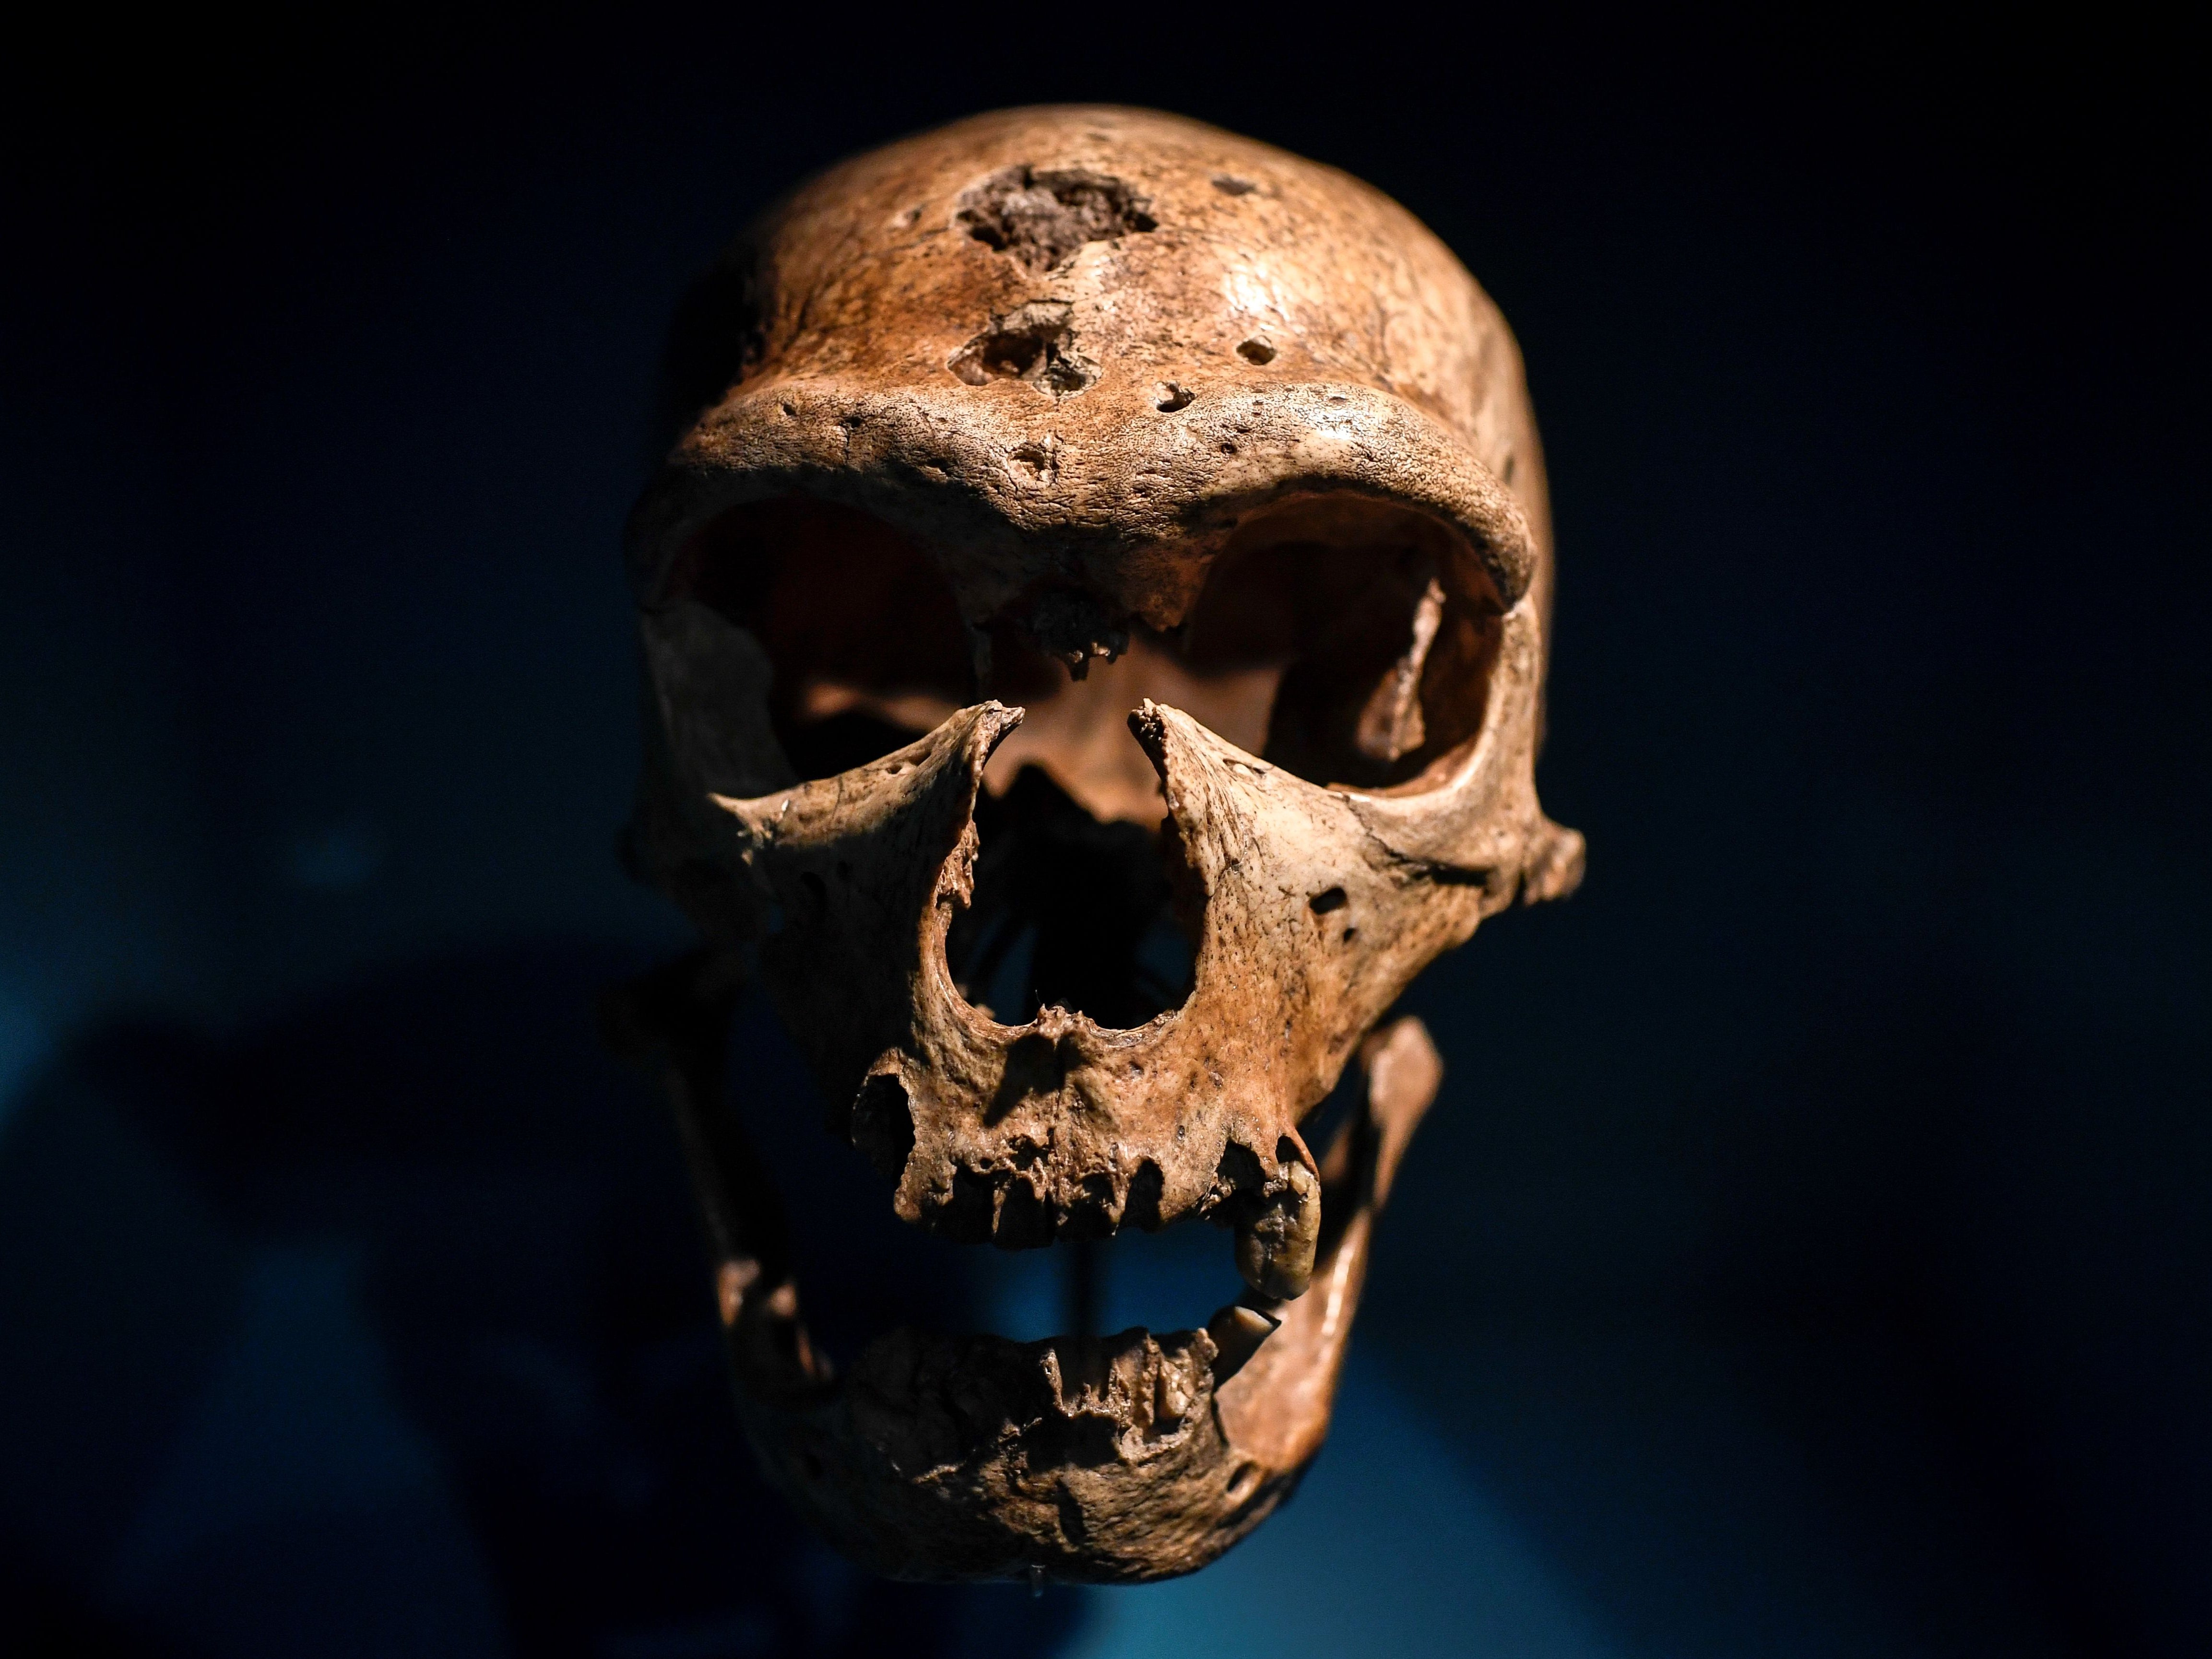 Neanderthals had a thickened brow ridge and large nose cavities compared to humans